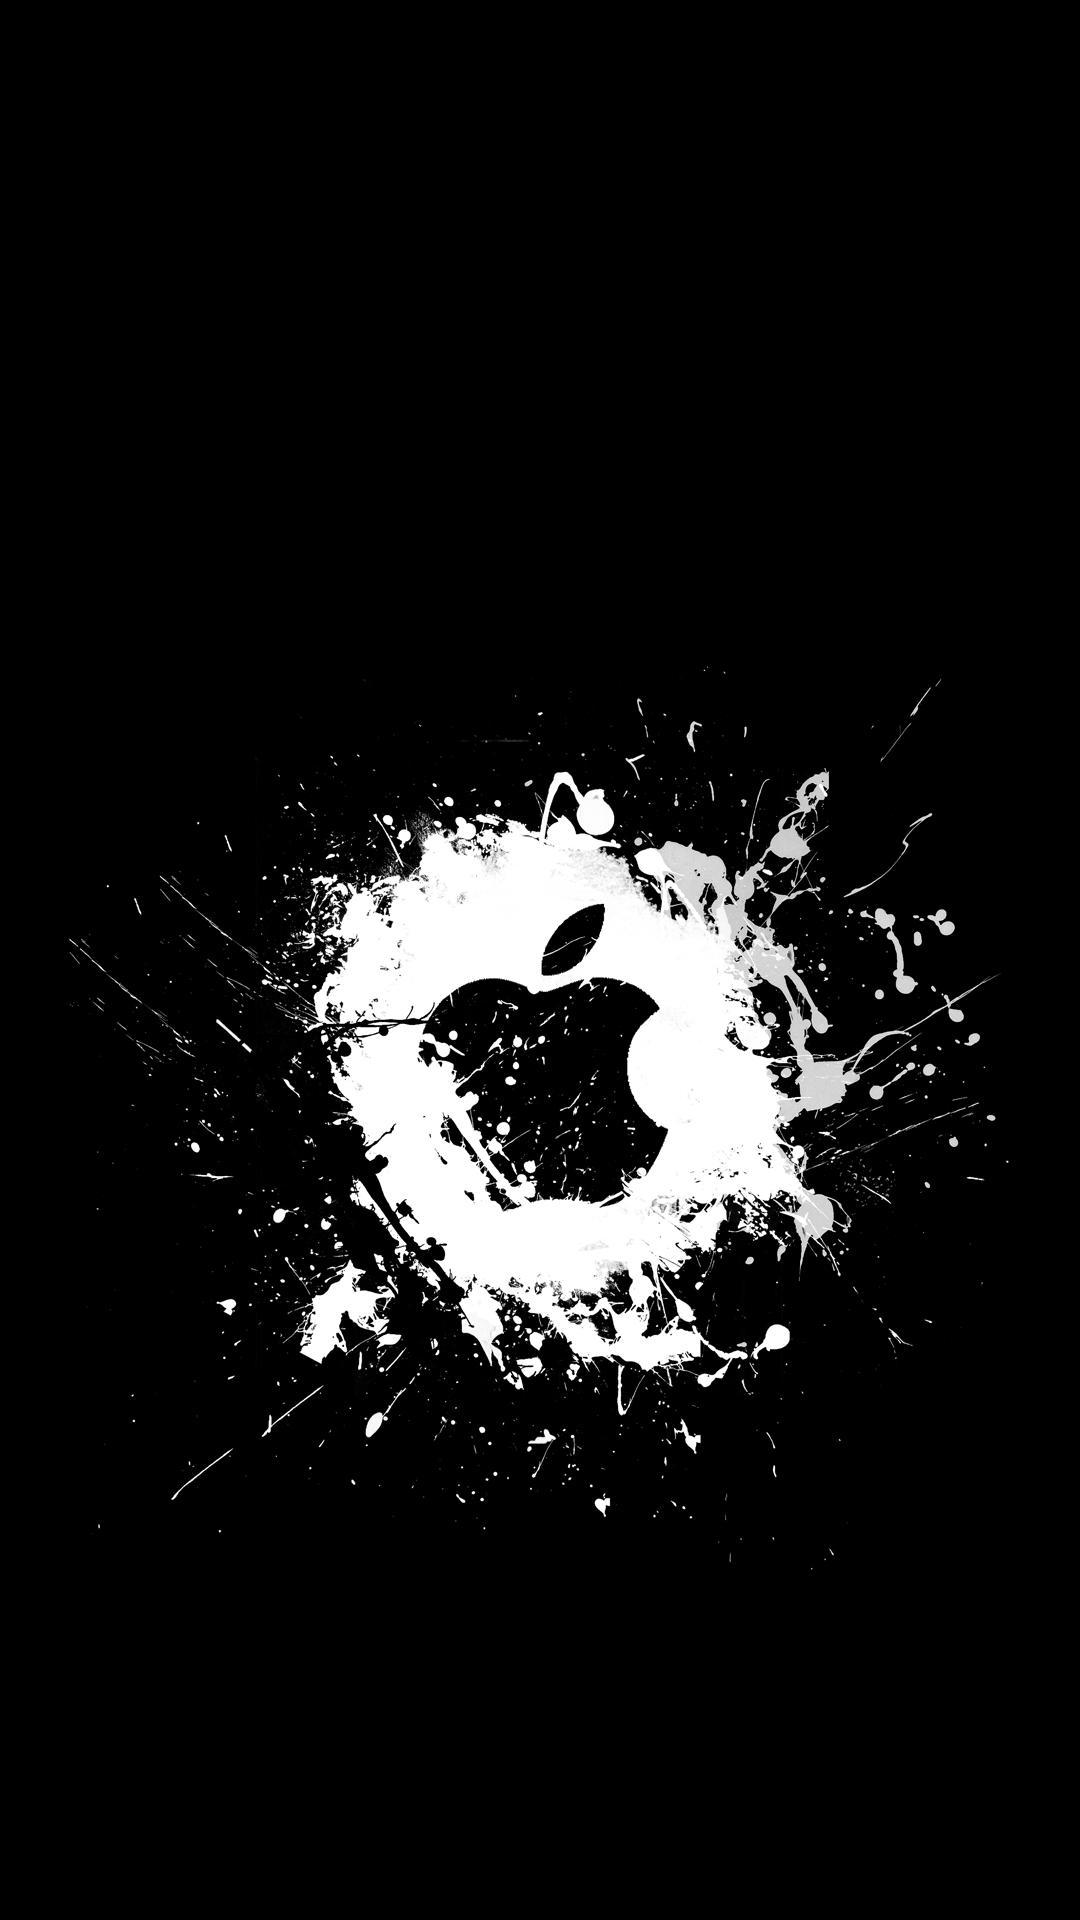 hd wallpapers for iphone 7,black,darkness,font,black and white,monochrome photography